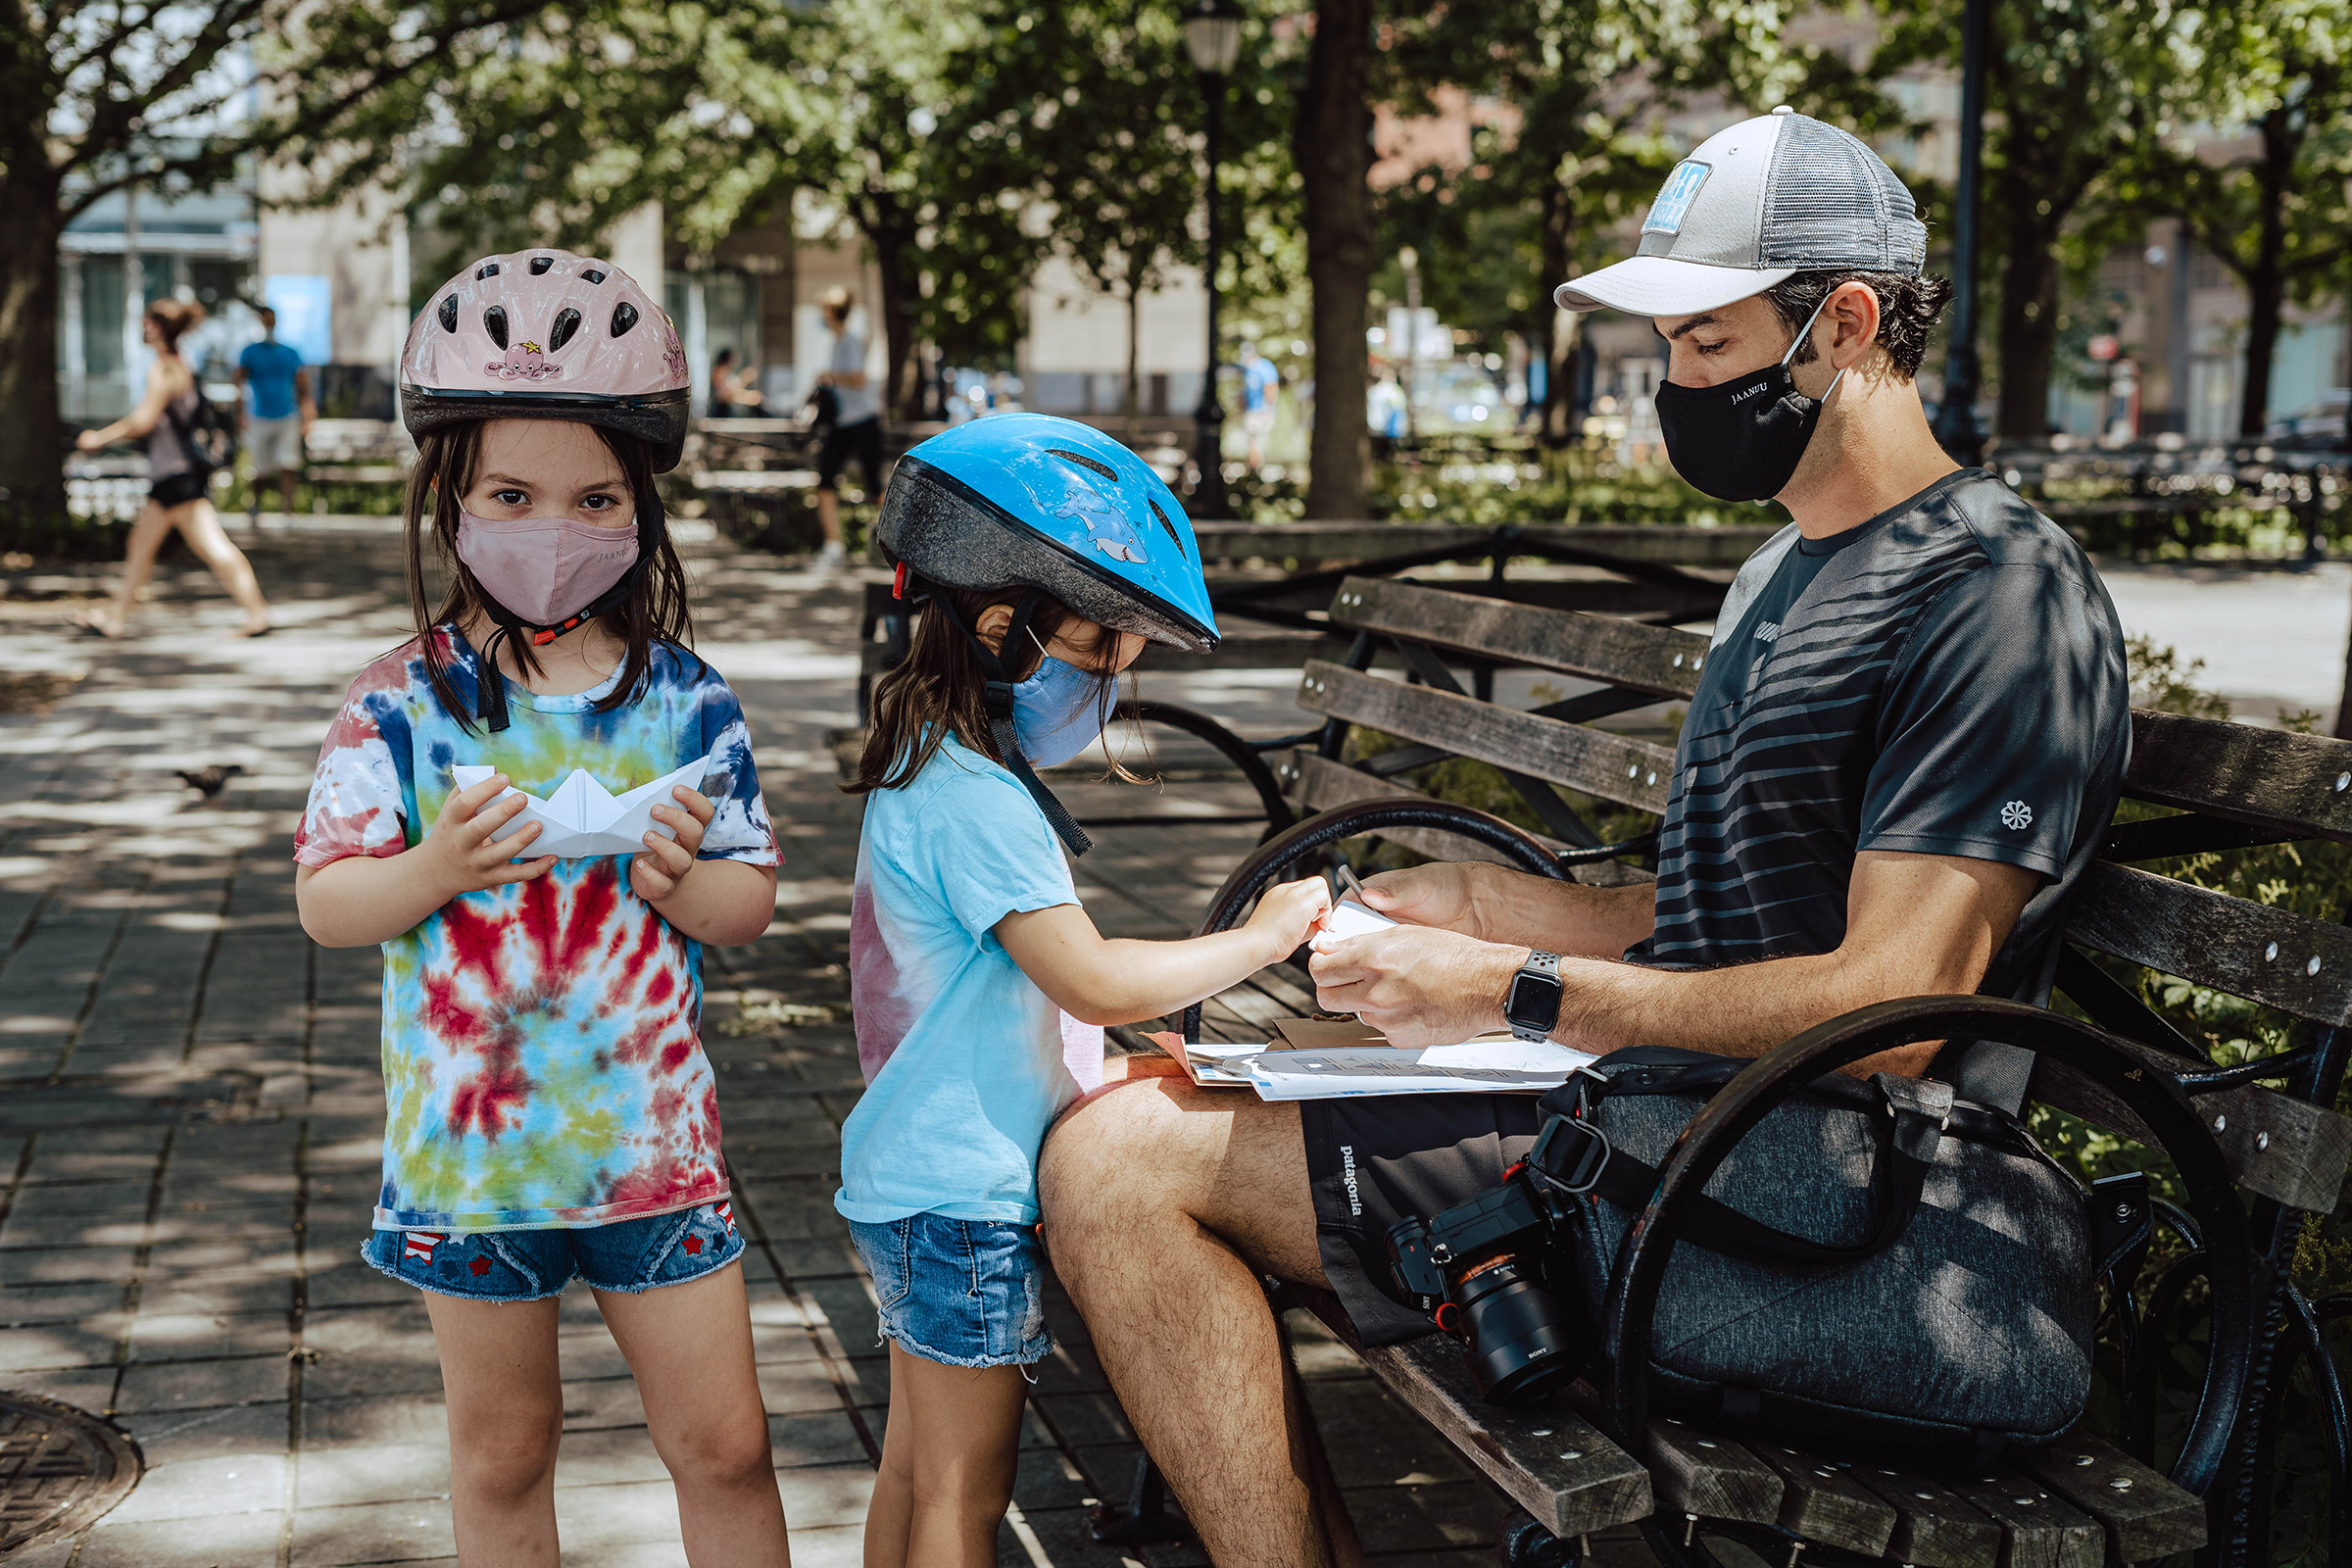 This photograph shows a young family in an urban park. The father is seated on a park bench on the right side of the picture. He wears shorts, a T-shirt, a baseball cap, and a facemask. On his lap he holds a stack of white papers. His backpack and camera rest on the bench beside him. Standing in front of him are two young girls. One of the girls faces the man and reaches to take a piece of paper. The second girl, on the left side of the photo, holds a completed origami boat and looks directly at the camera. Both of the girls wear denim shorts, tie-dye T-shirts, bike helmets, and facemasks.